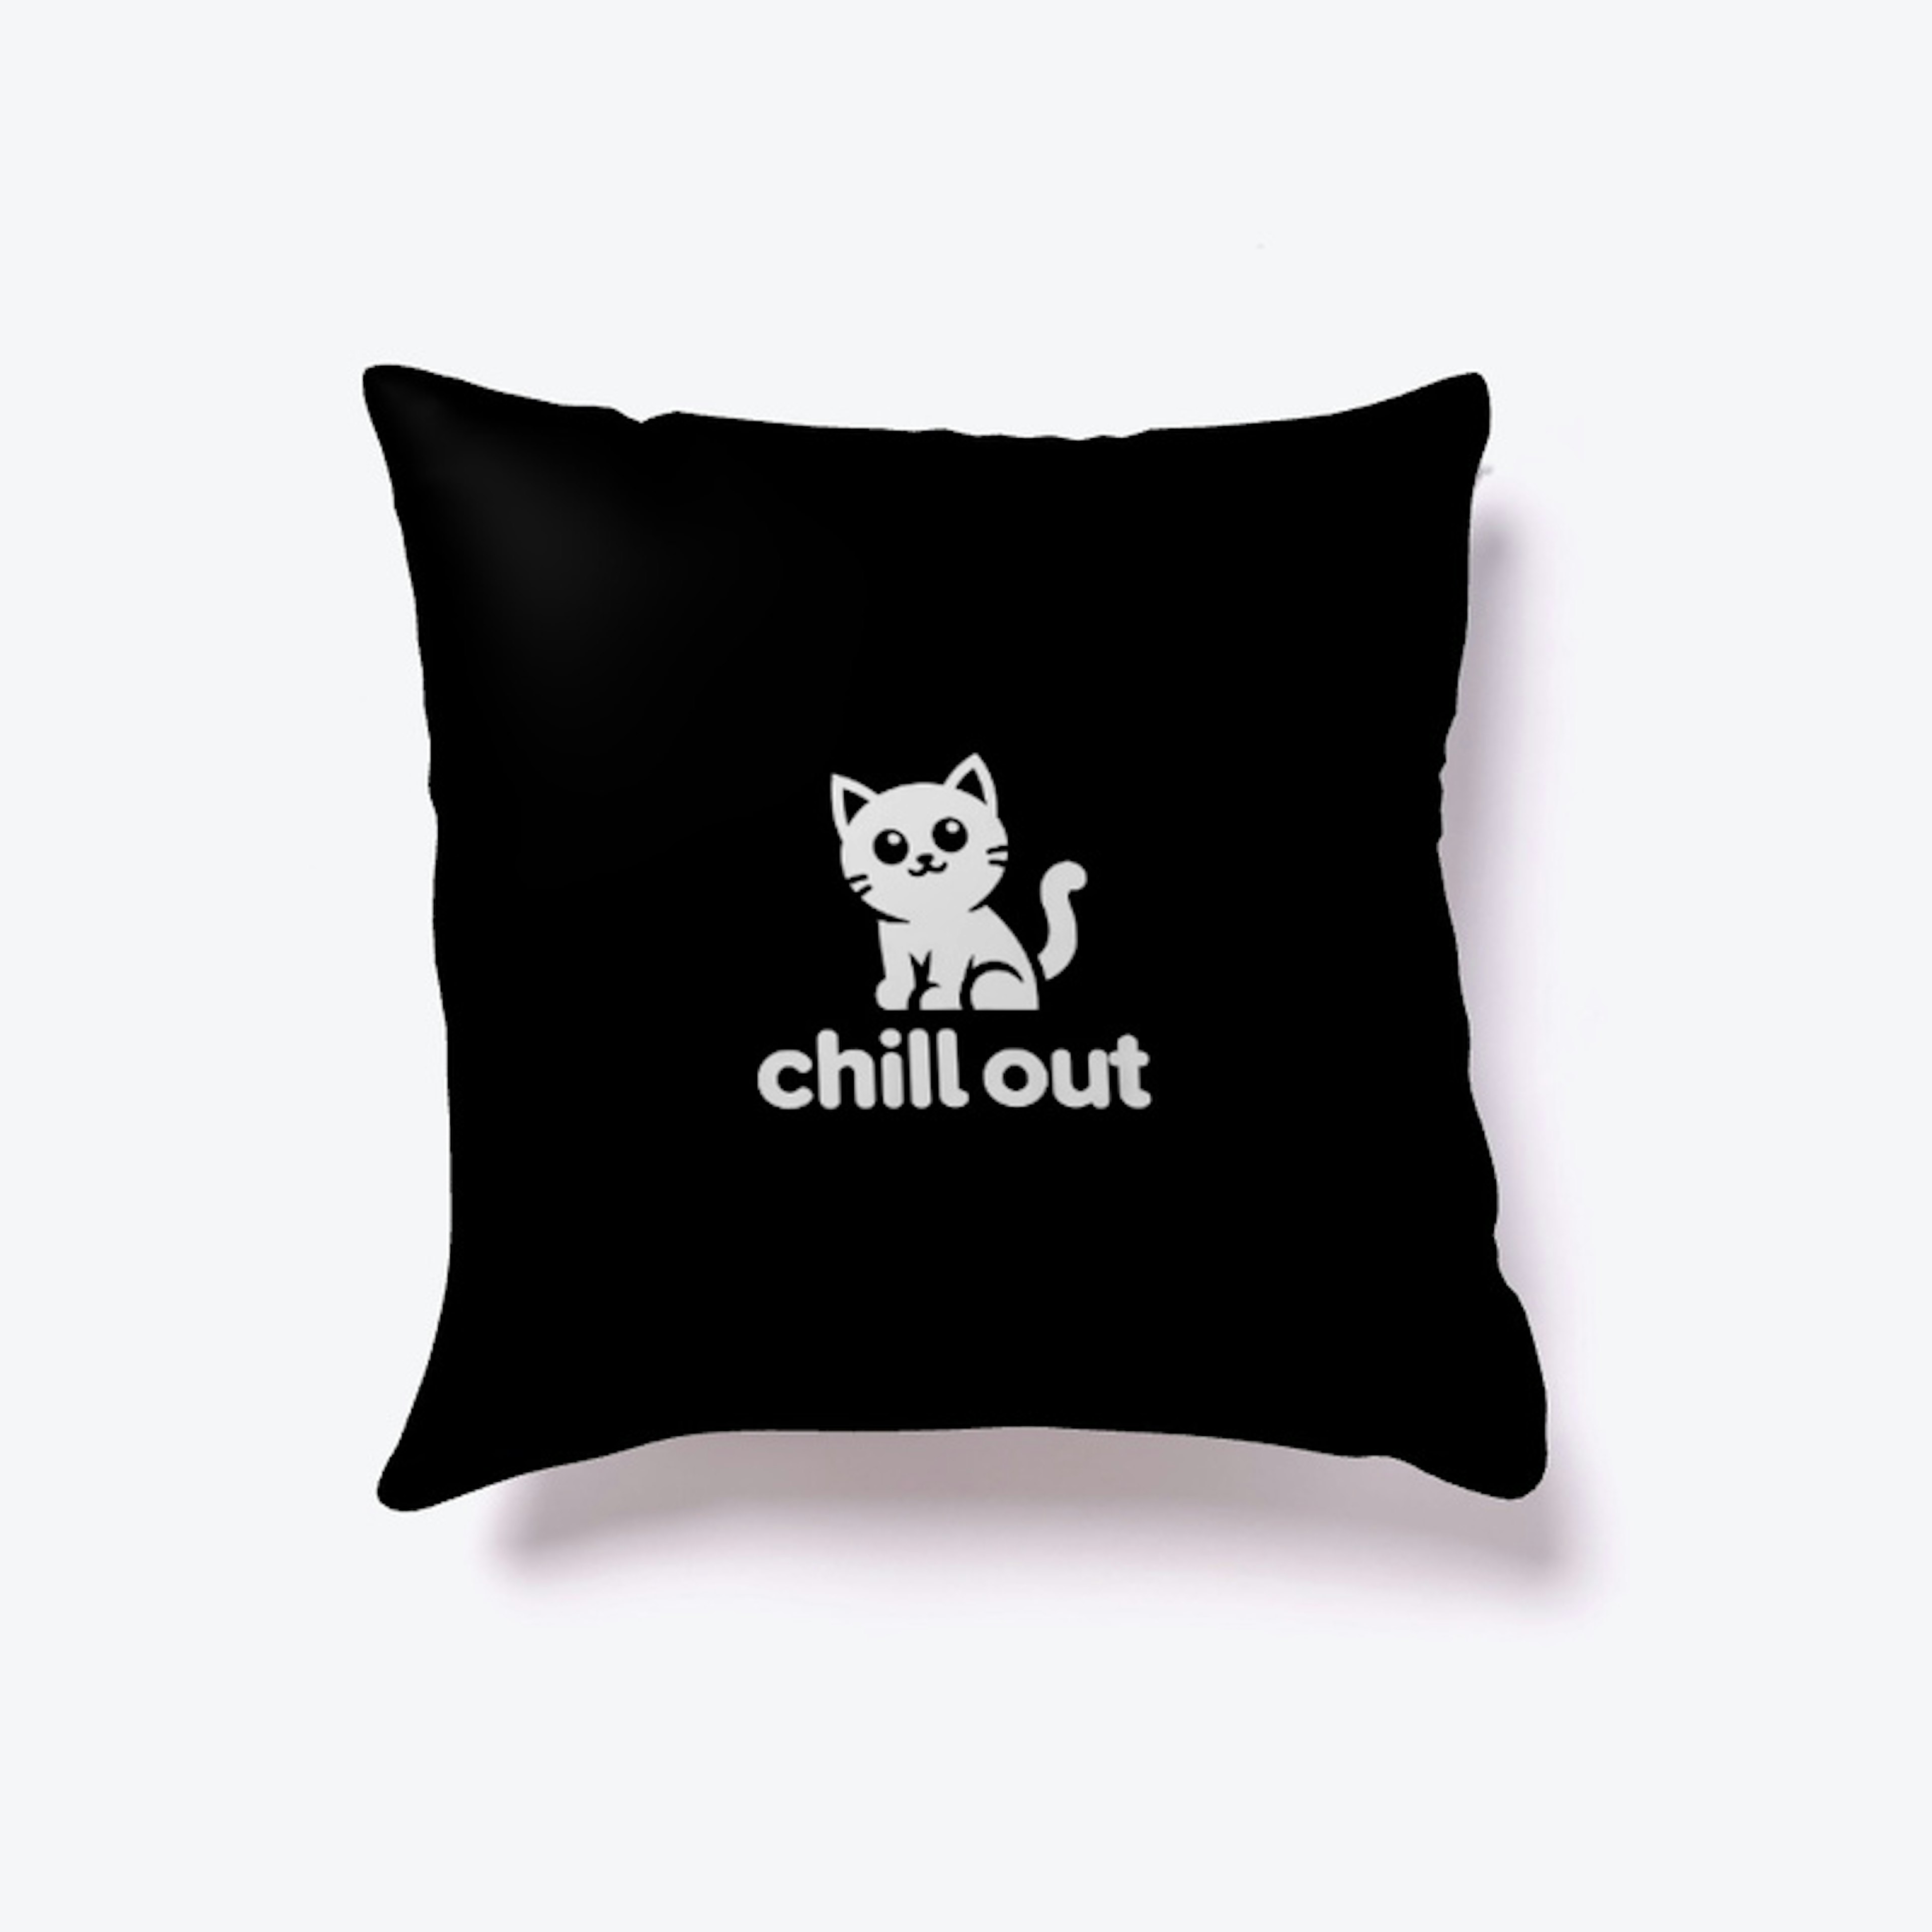 Chillout Cute Cat